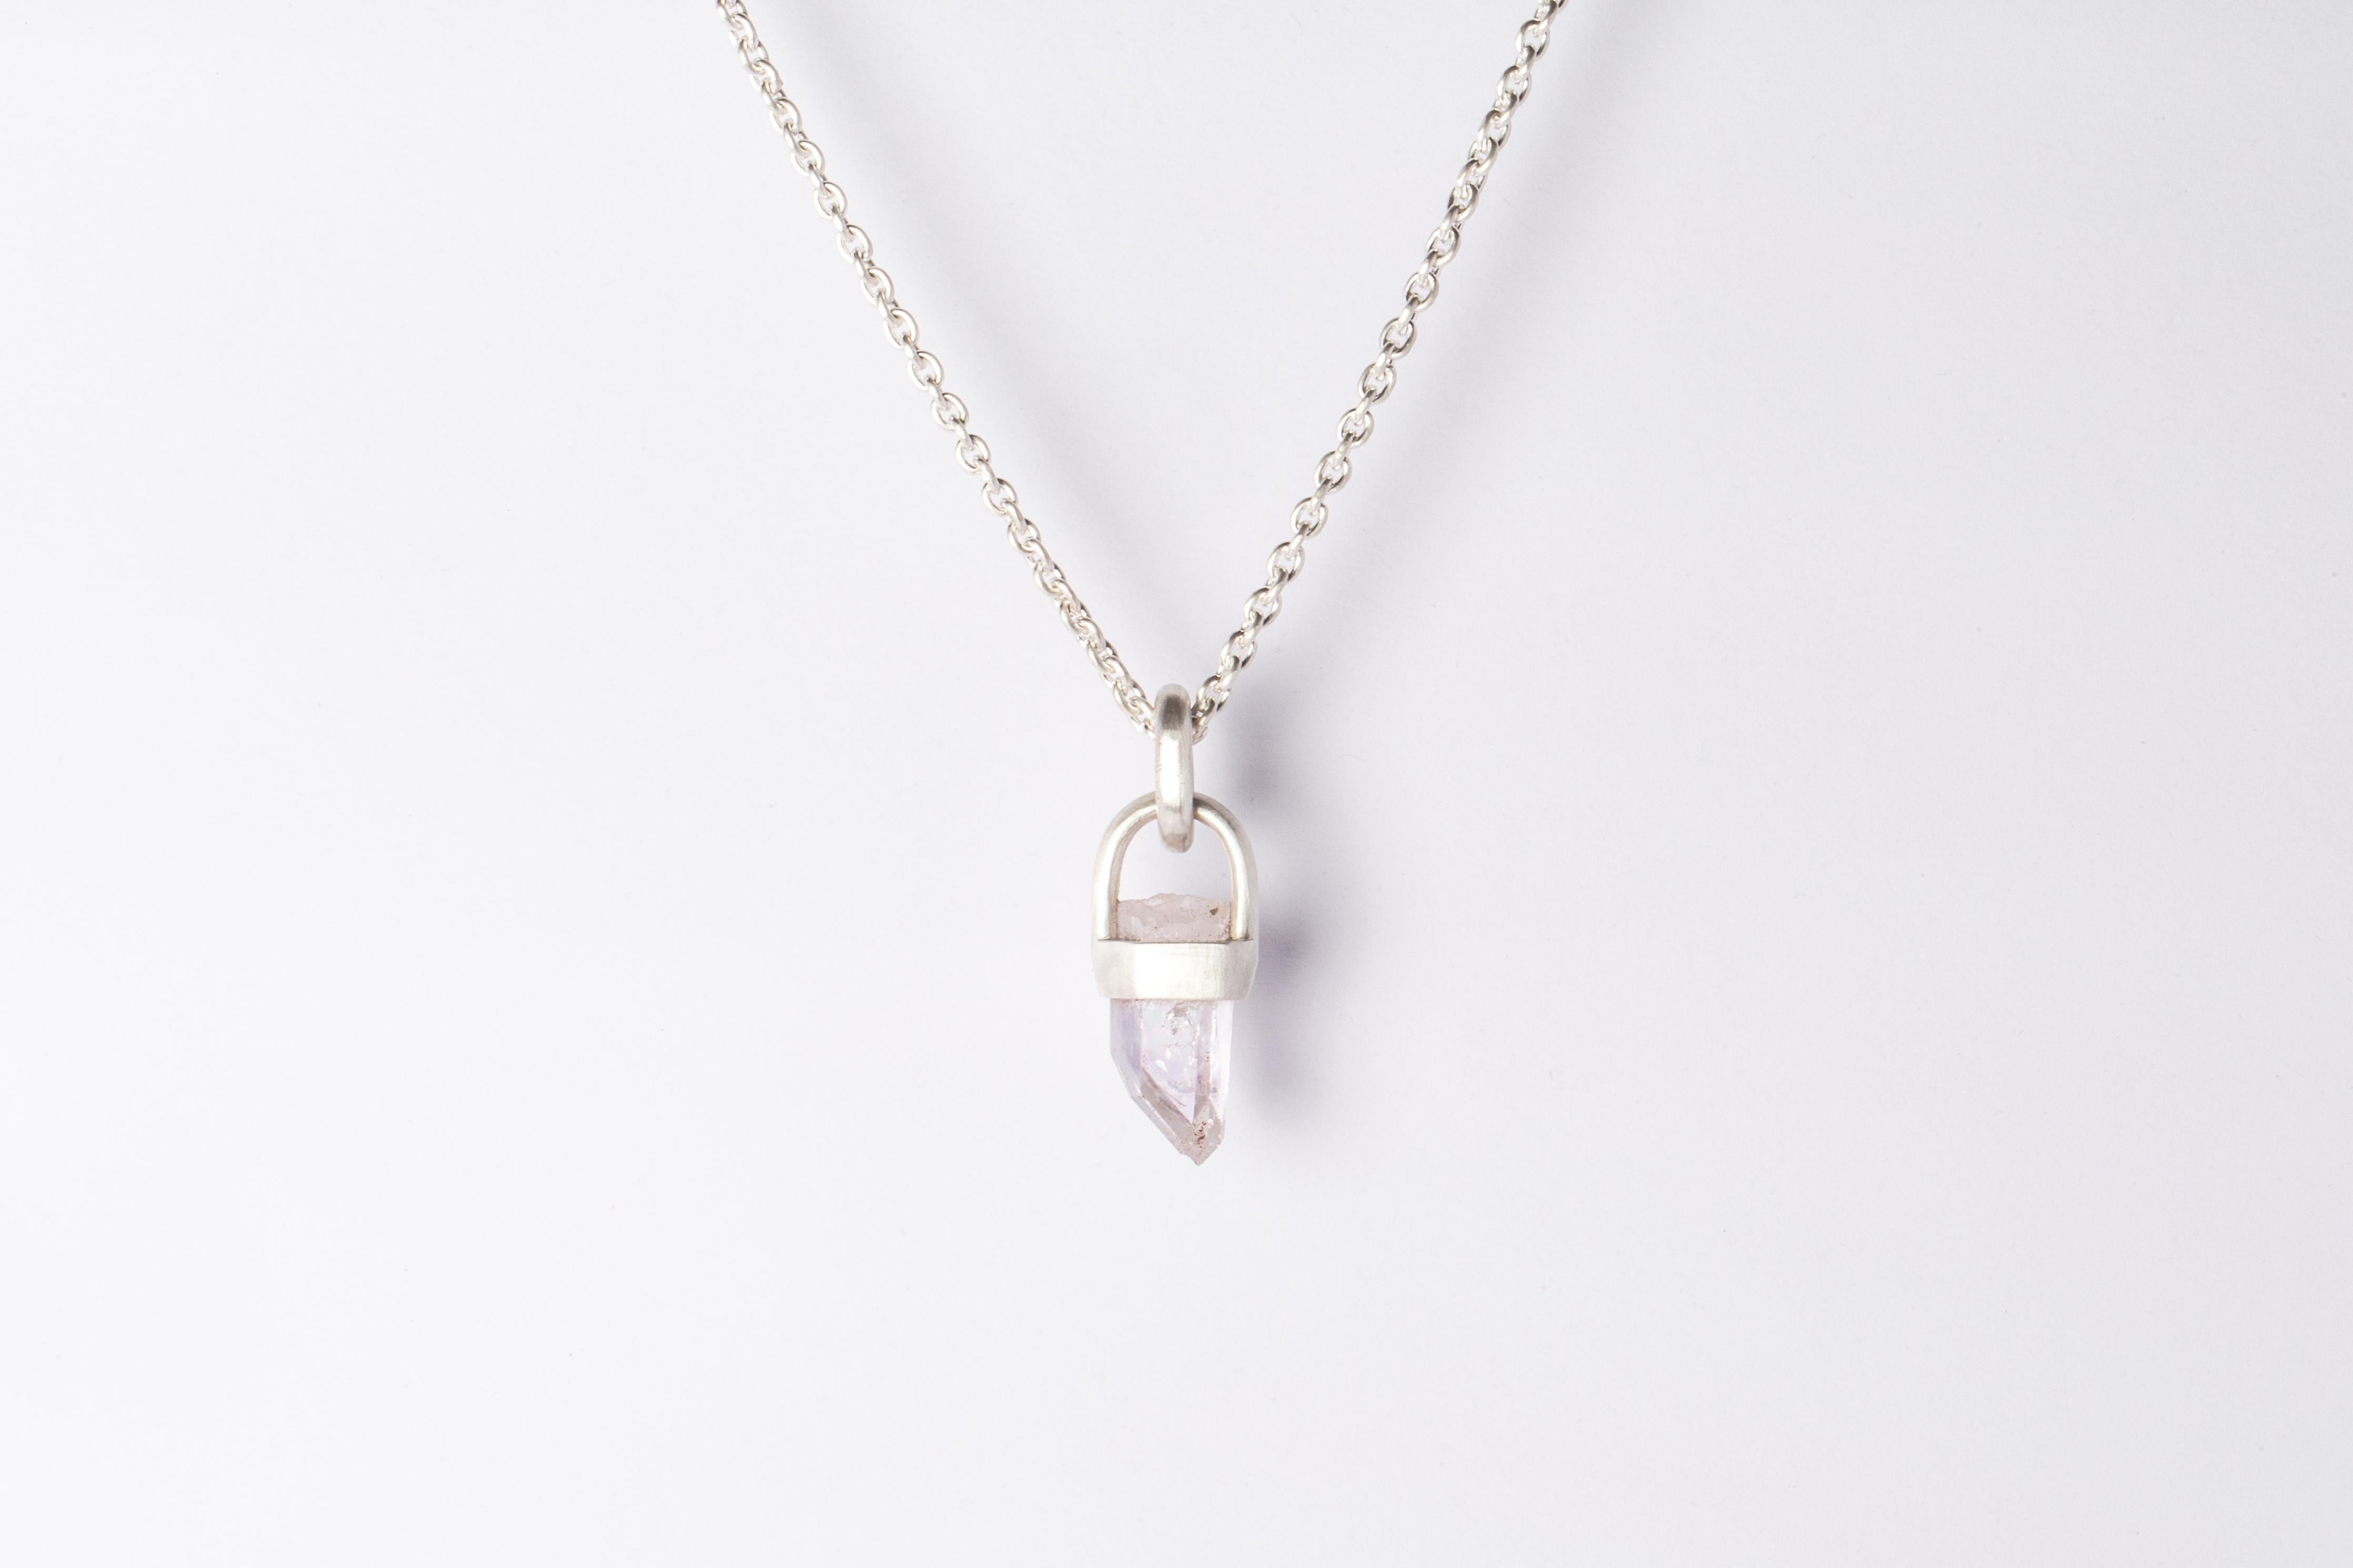 Pendant necklace in matte sterling silver and a rough of Amethyst. It comes on 74 cm sterling silver chain.

The Talisman series is an exploration into the power of natural crystals. The crystals used in these pieces are discovered through adventure